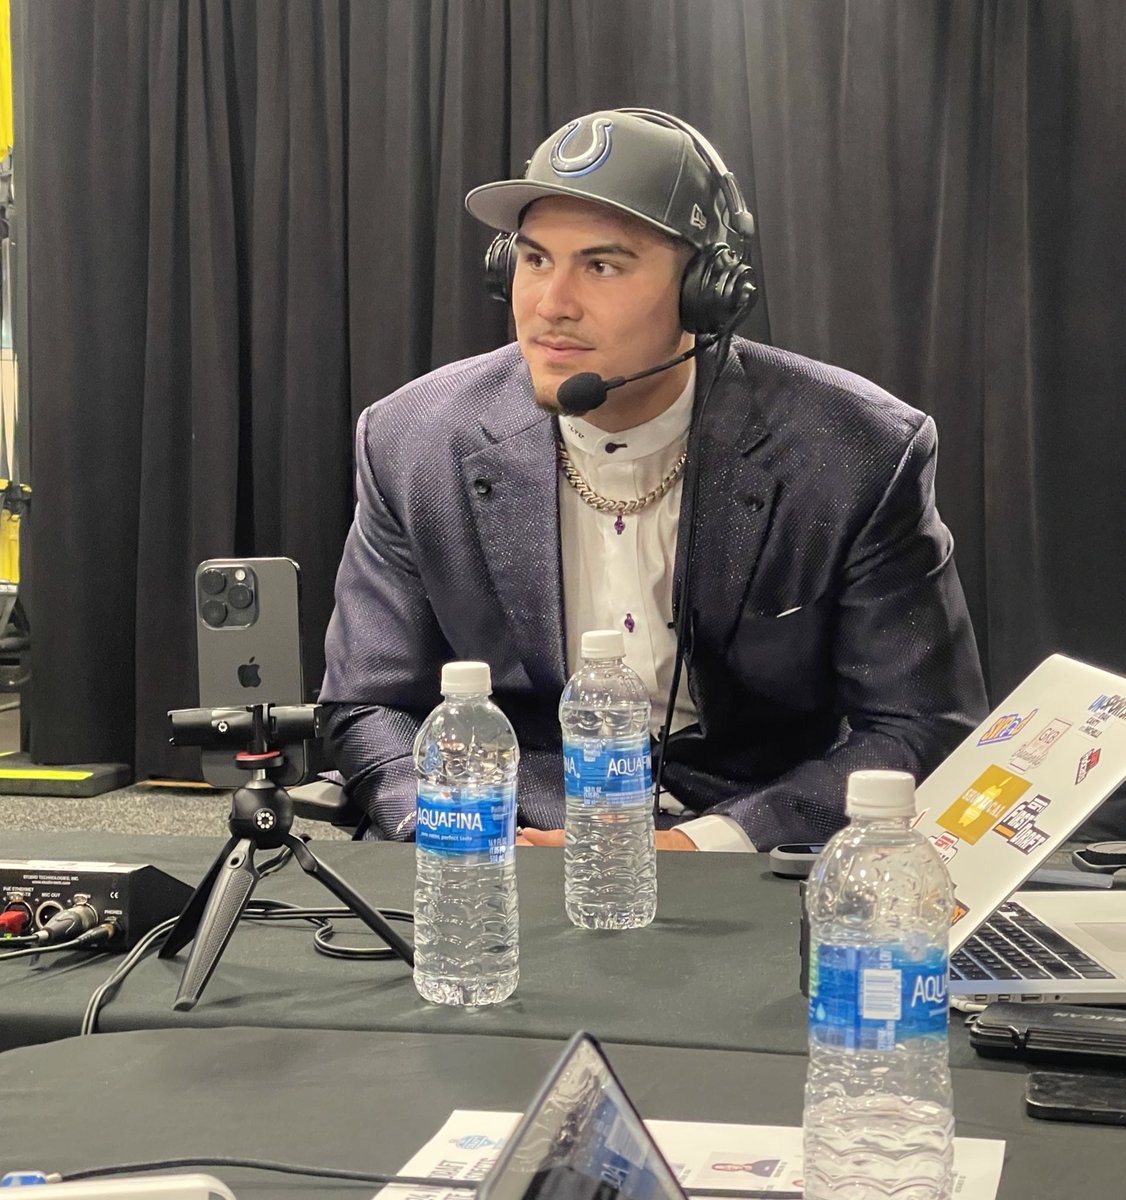 Laiatu Latu says that his cross-chop move started from watching so much tape on Aaron Donald and he saw how much it worked. It then became his go to move.